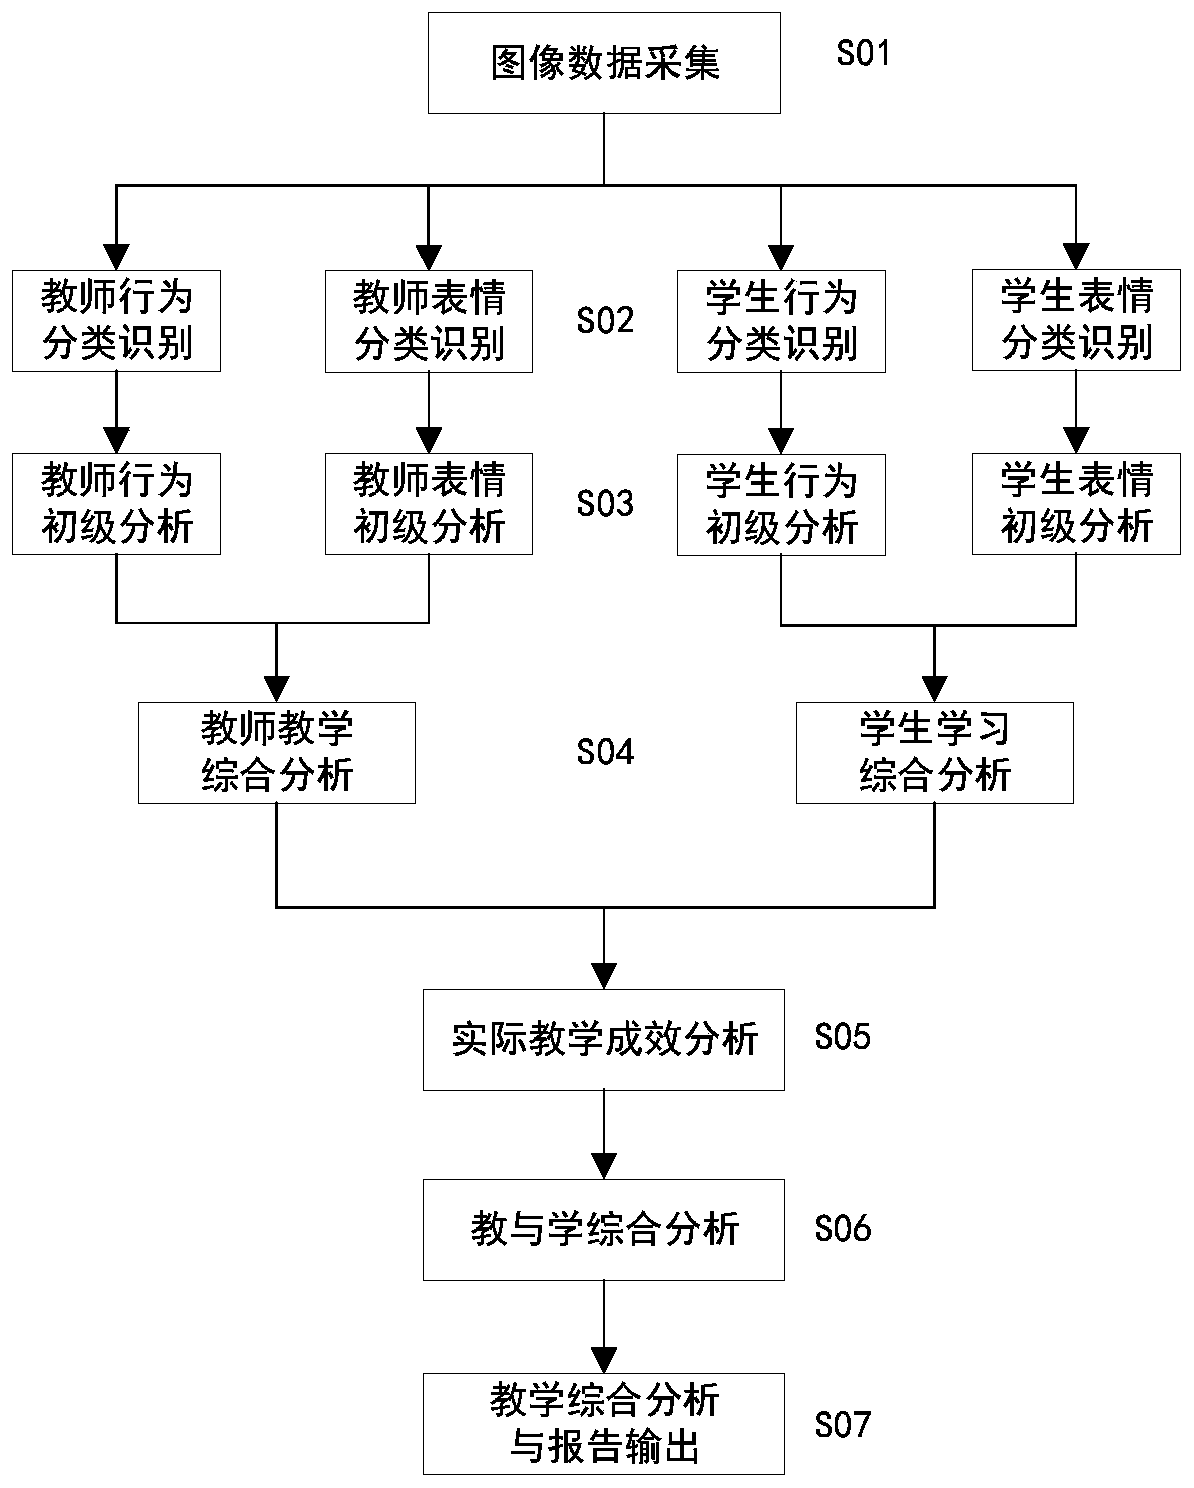 Classroom teaching analysis and quality evaluation system and method based on behavior and expression intelligent identification